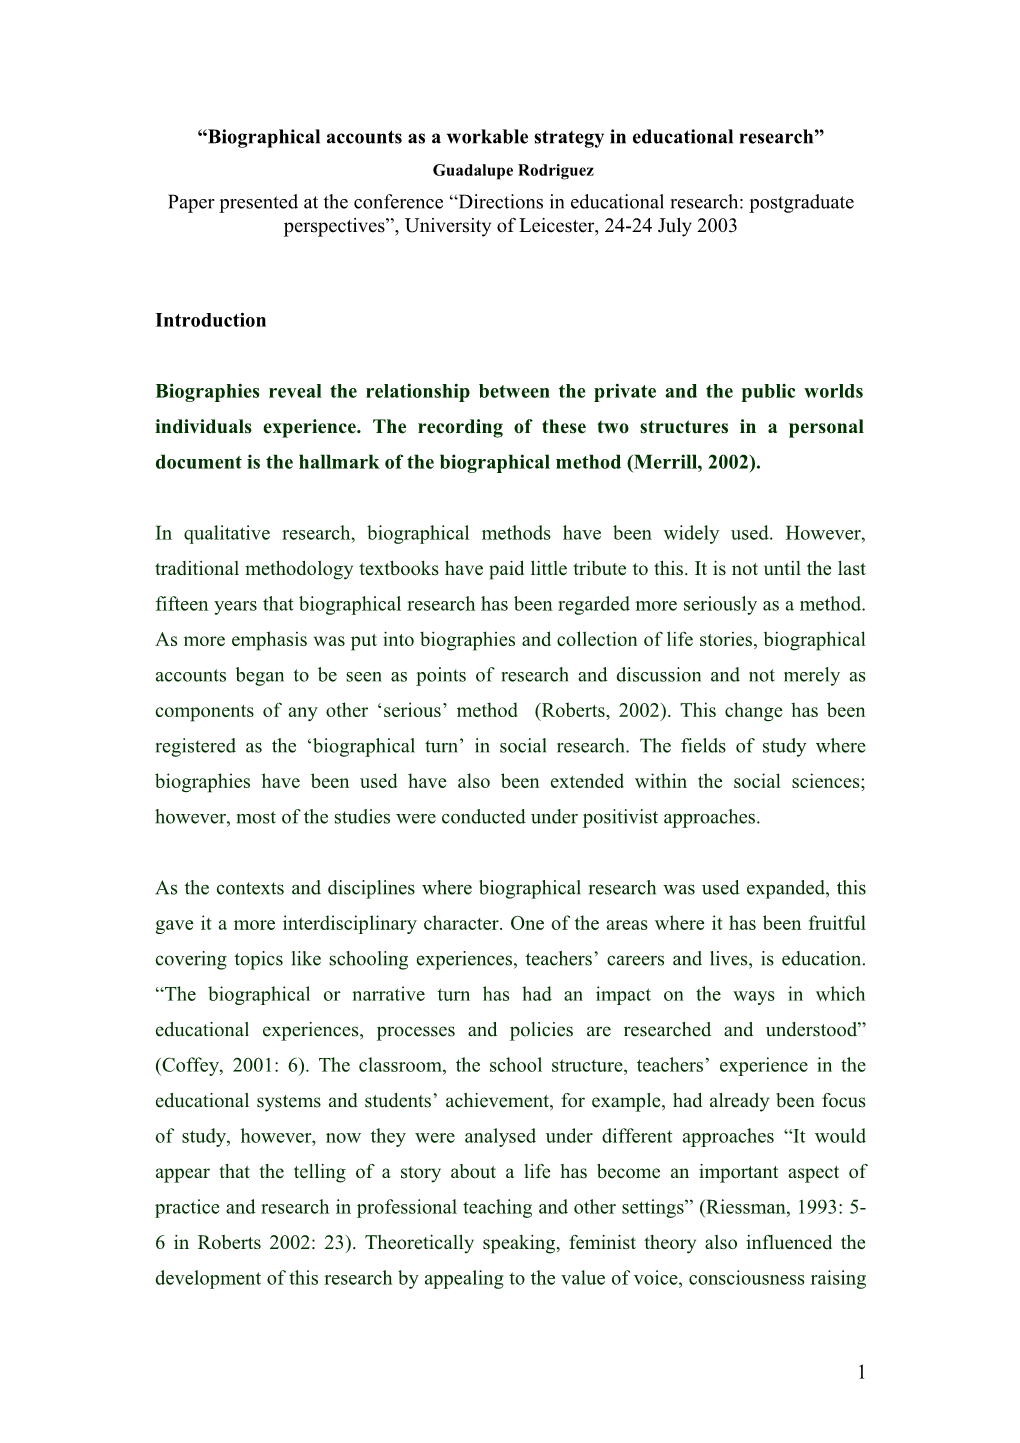 Biographical Accounts As a Workable Strategy in Educational Research